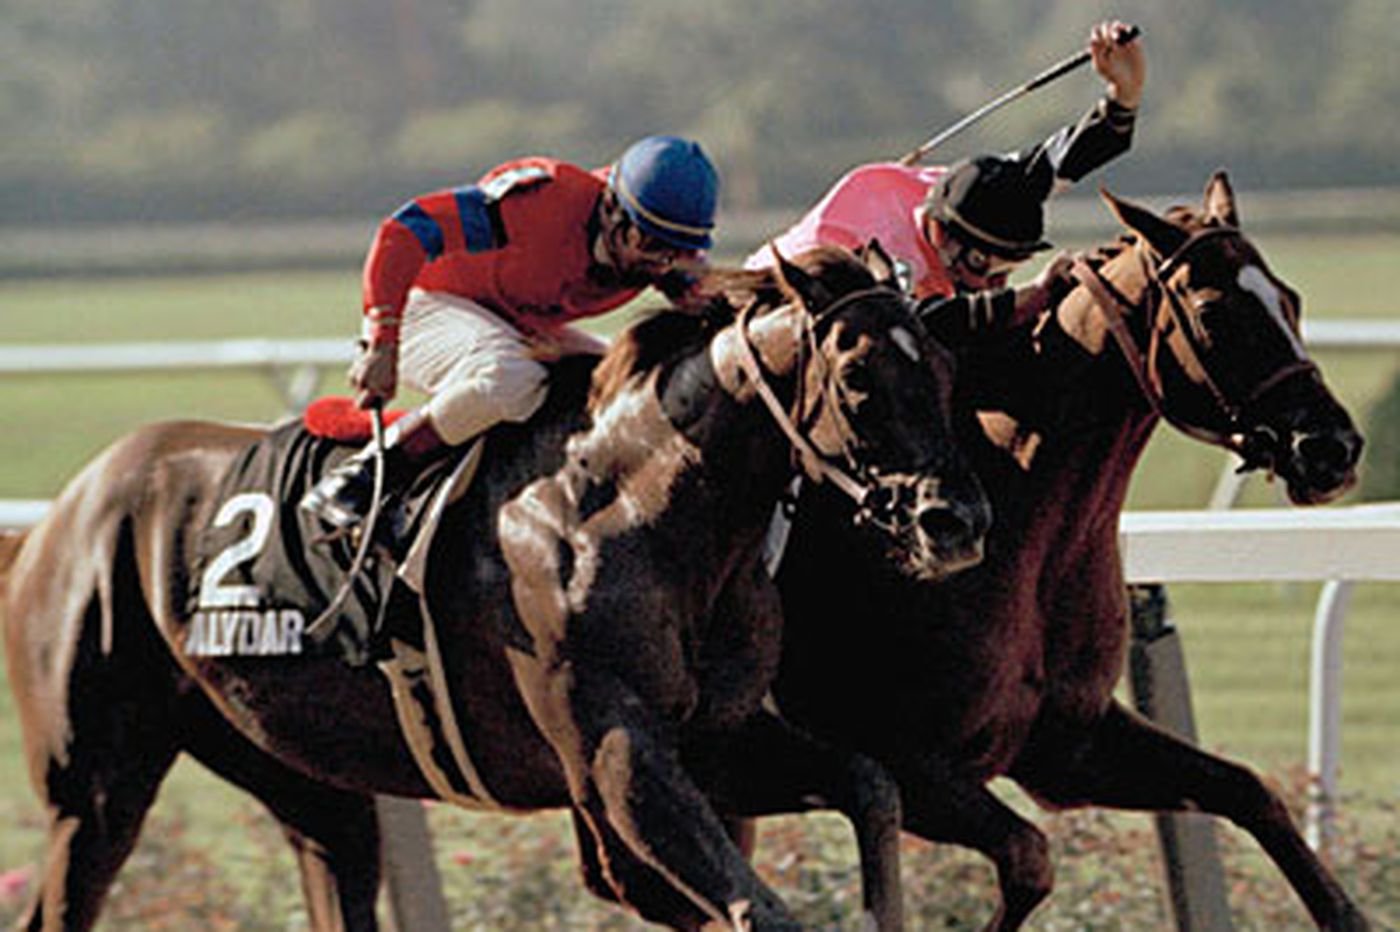 Alydar running neck and neck with his rival, Affirm, at one of the 1978 Triple Crown races. In 1990, Alydar was euthanized at his home in Calumet Farm under suspicious circumstances surrounding the financial collapse of its owner.